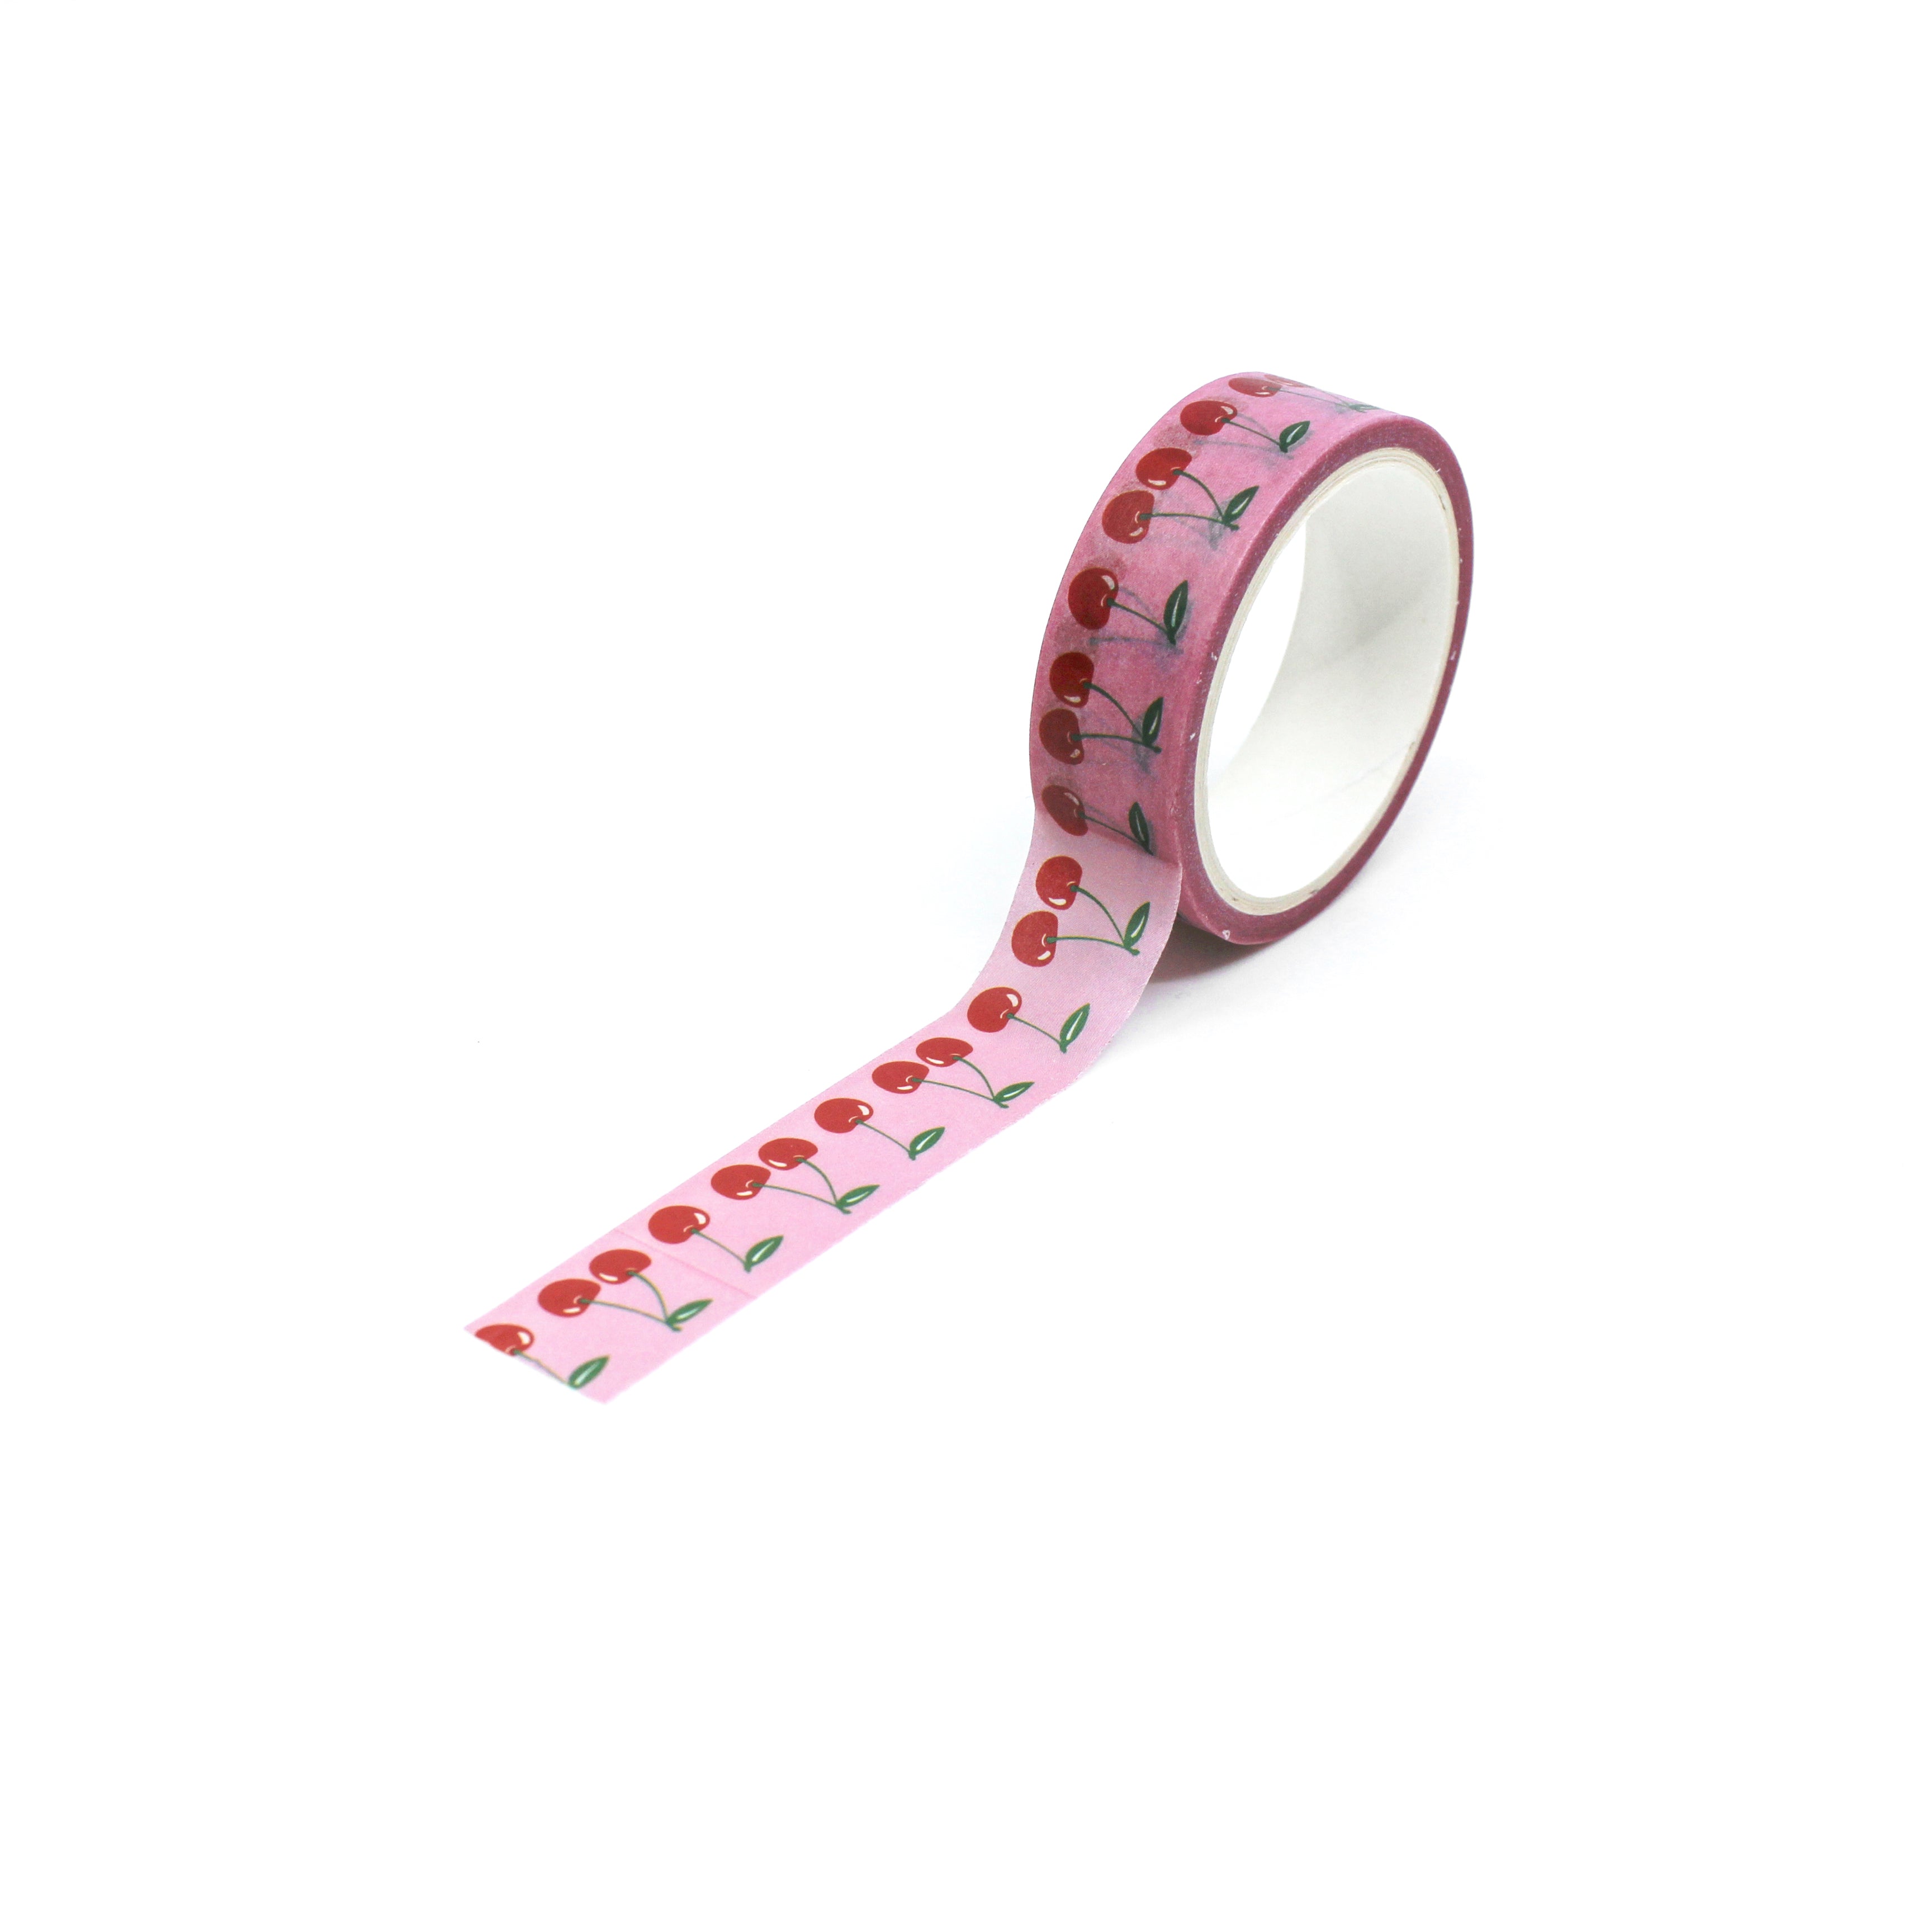 This is a full pattern repeat view of red cherry washi tape BBB Supplies Craft Shop